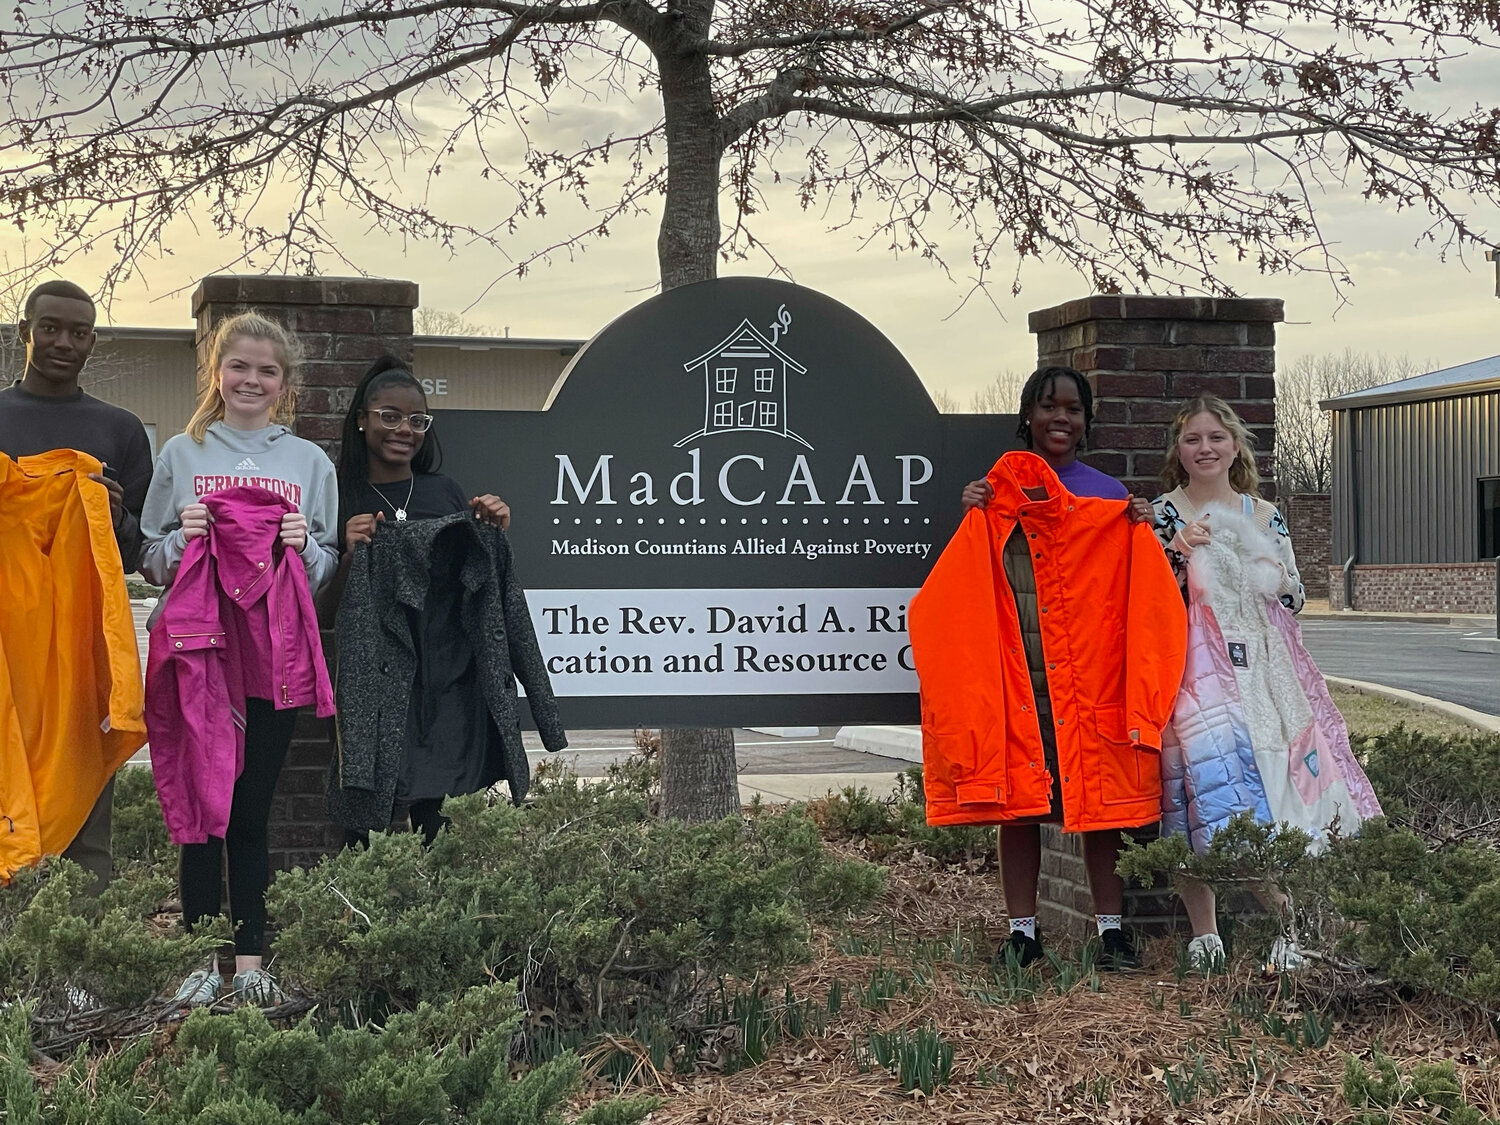 Ashtun Chigbo, Avery Hornback, Miah Schiller, Tytianna Robinson-Course and Julia Lever deliver coats to MadCAAP.